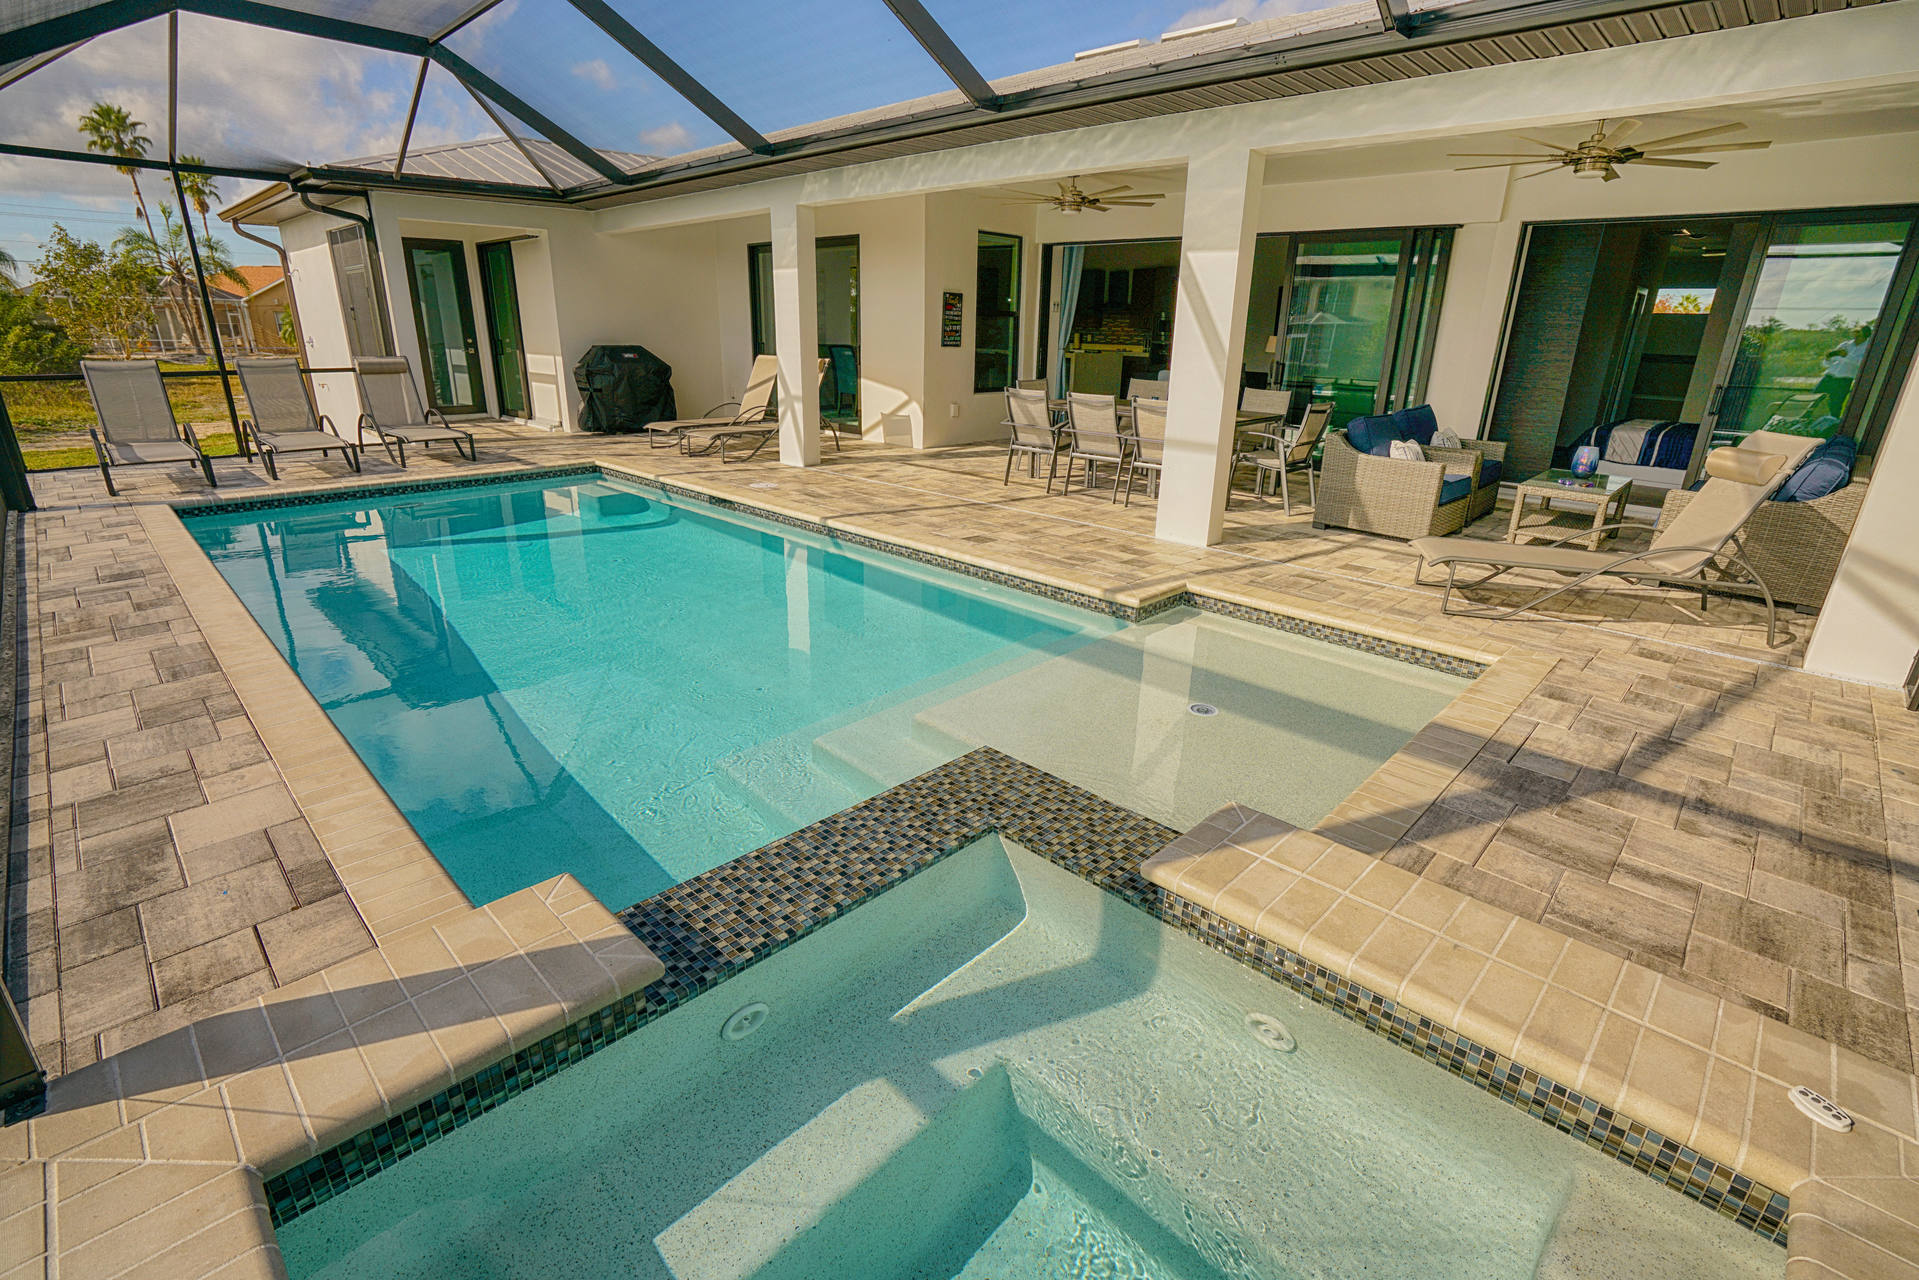 Pool area in the rental home